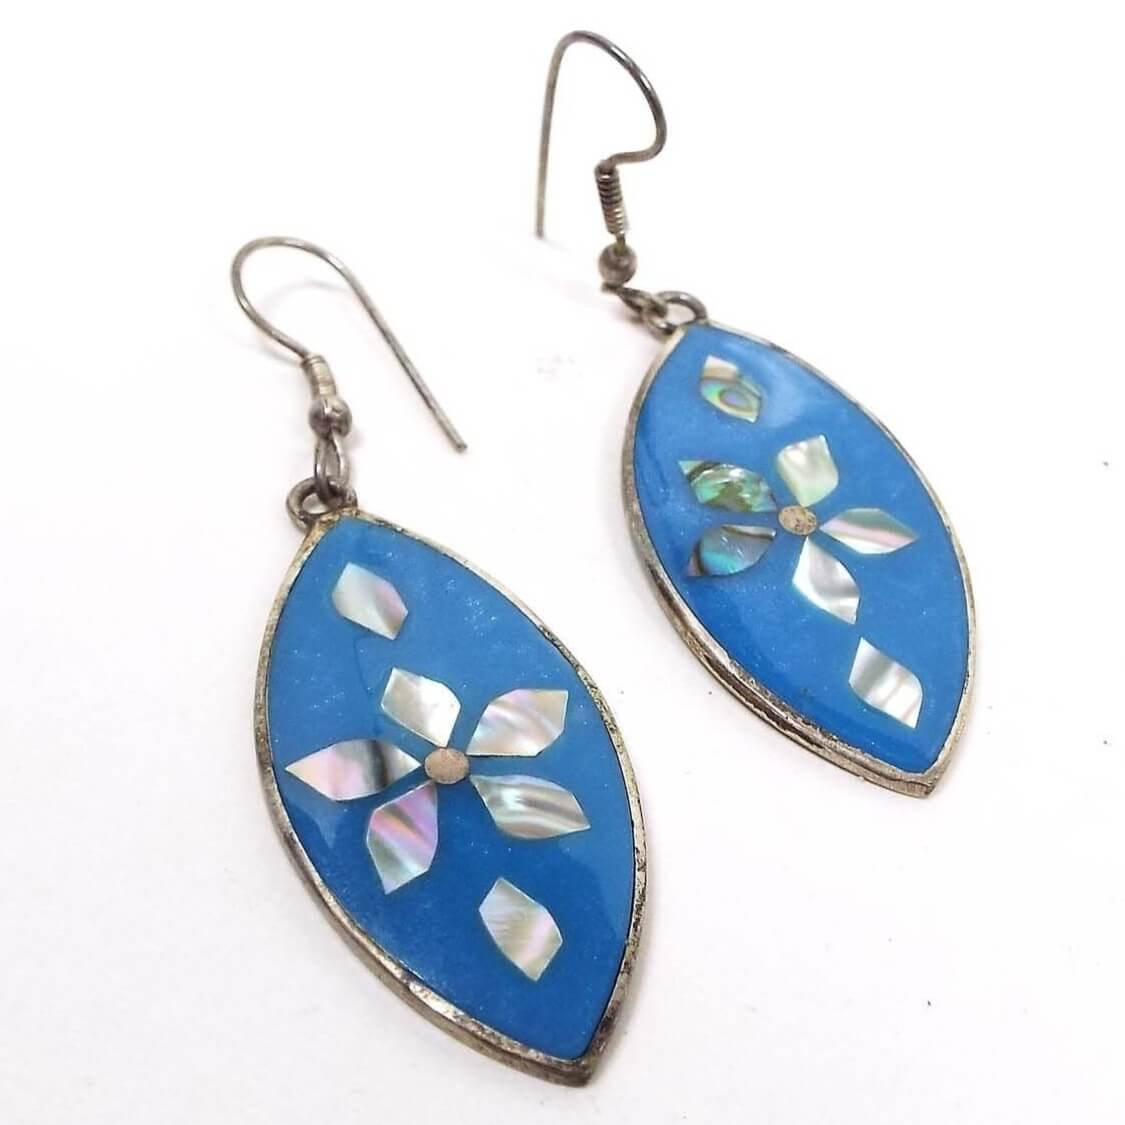 Front view of the retro vintage Southwestern earrings. They are marquis shaped with pearly blue resin and inlaid pieces of abalone shell forming a flower design. The metal is silver tone in color and they have hook style earwires.